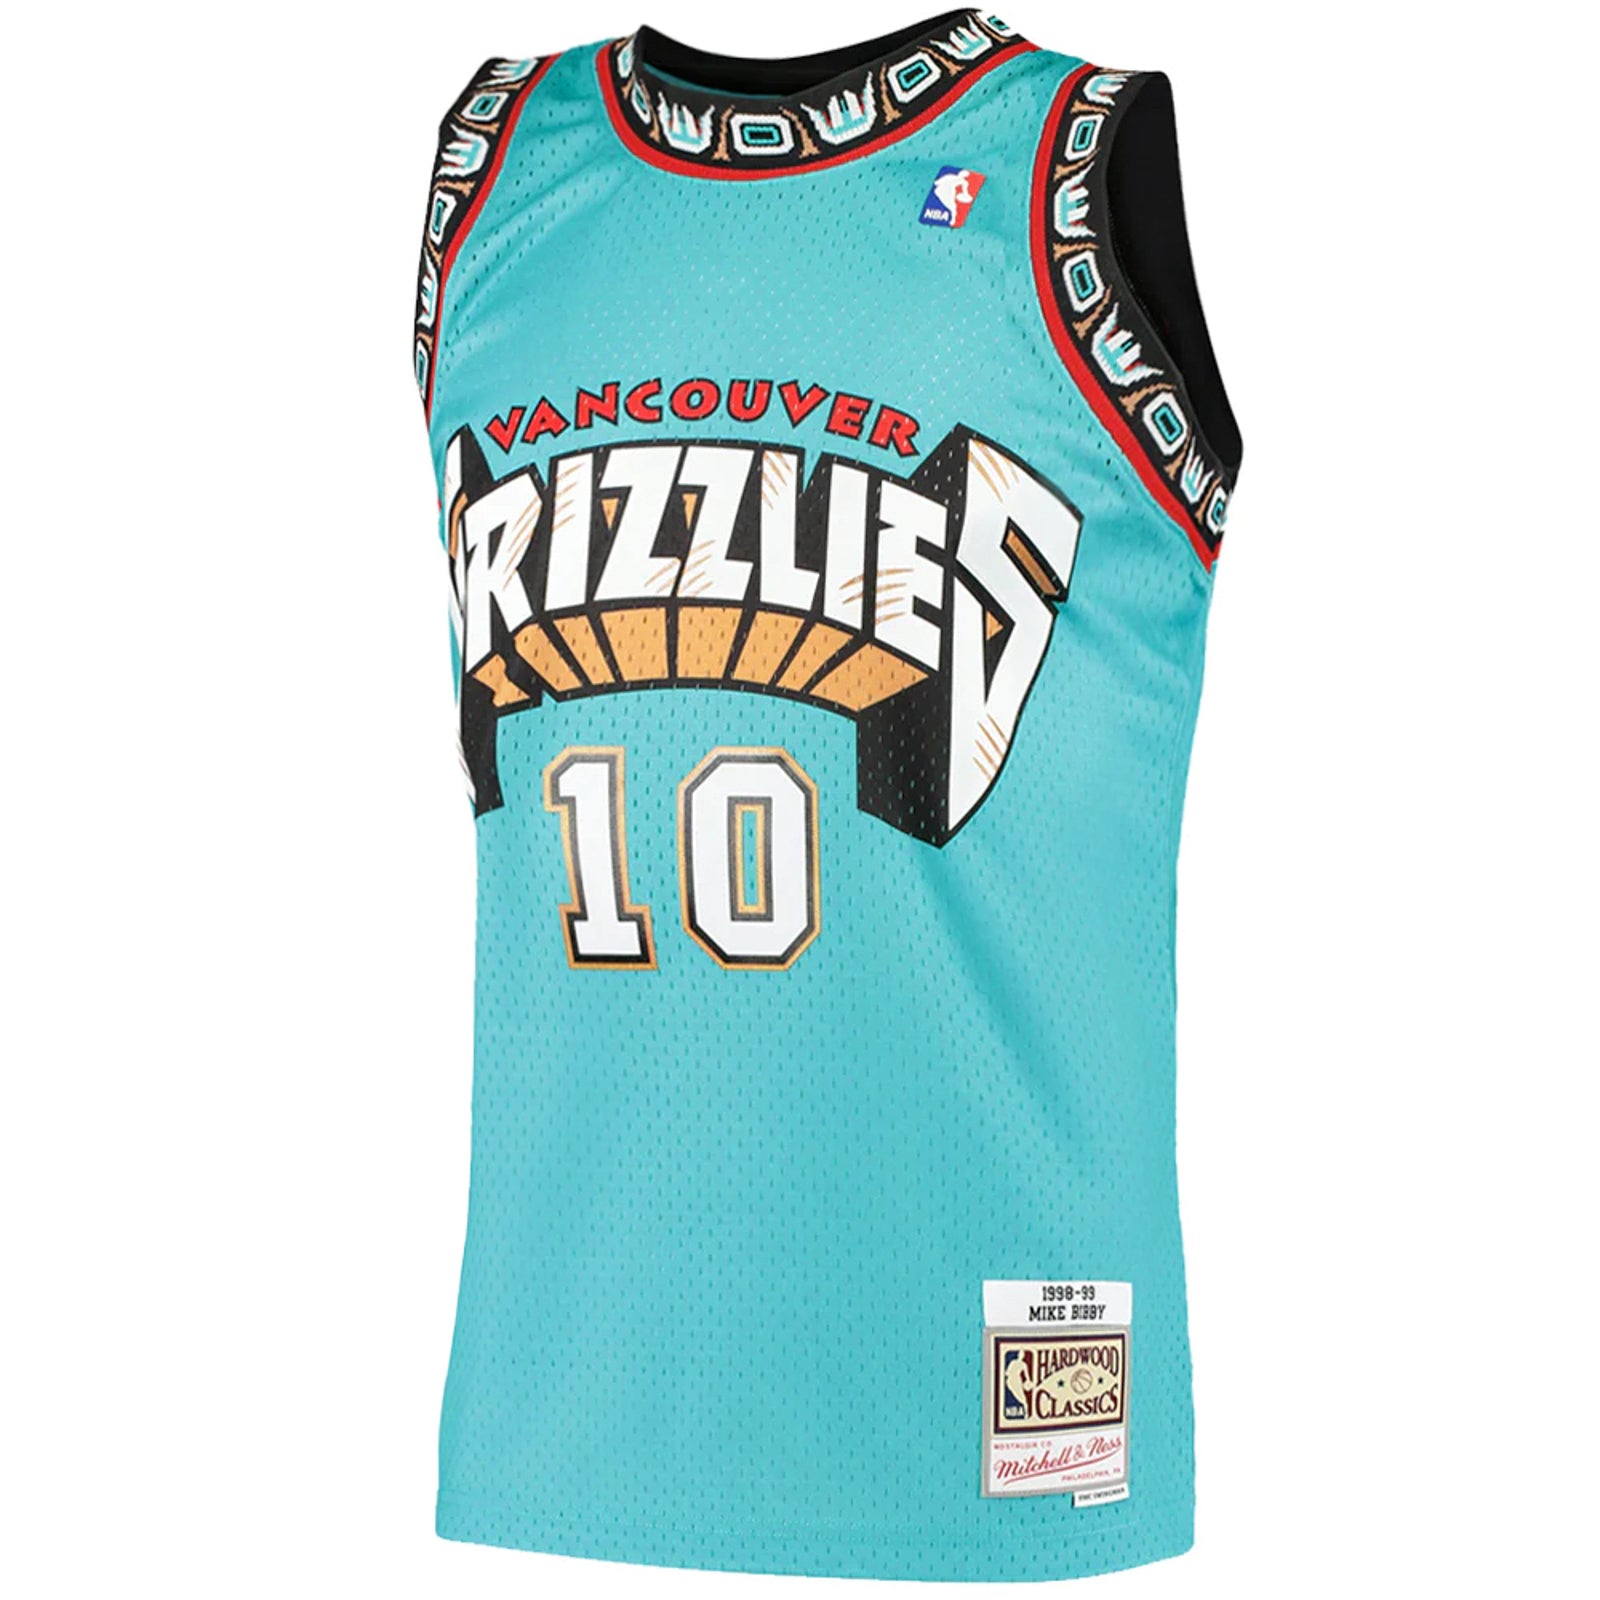 Mike Bibby Vancouver Grizzlies Mitchell & Ness Hardwood Classics Name &  Number T-Shirt - White